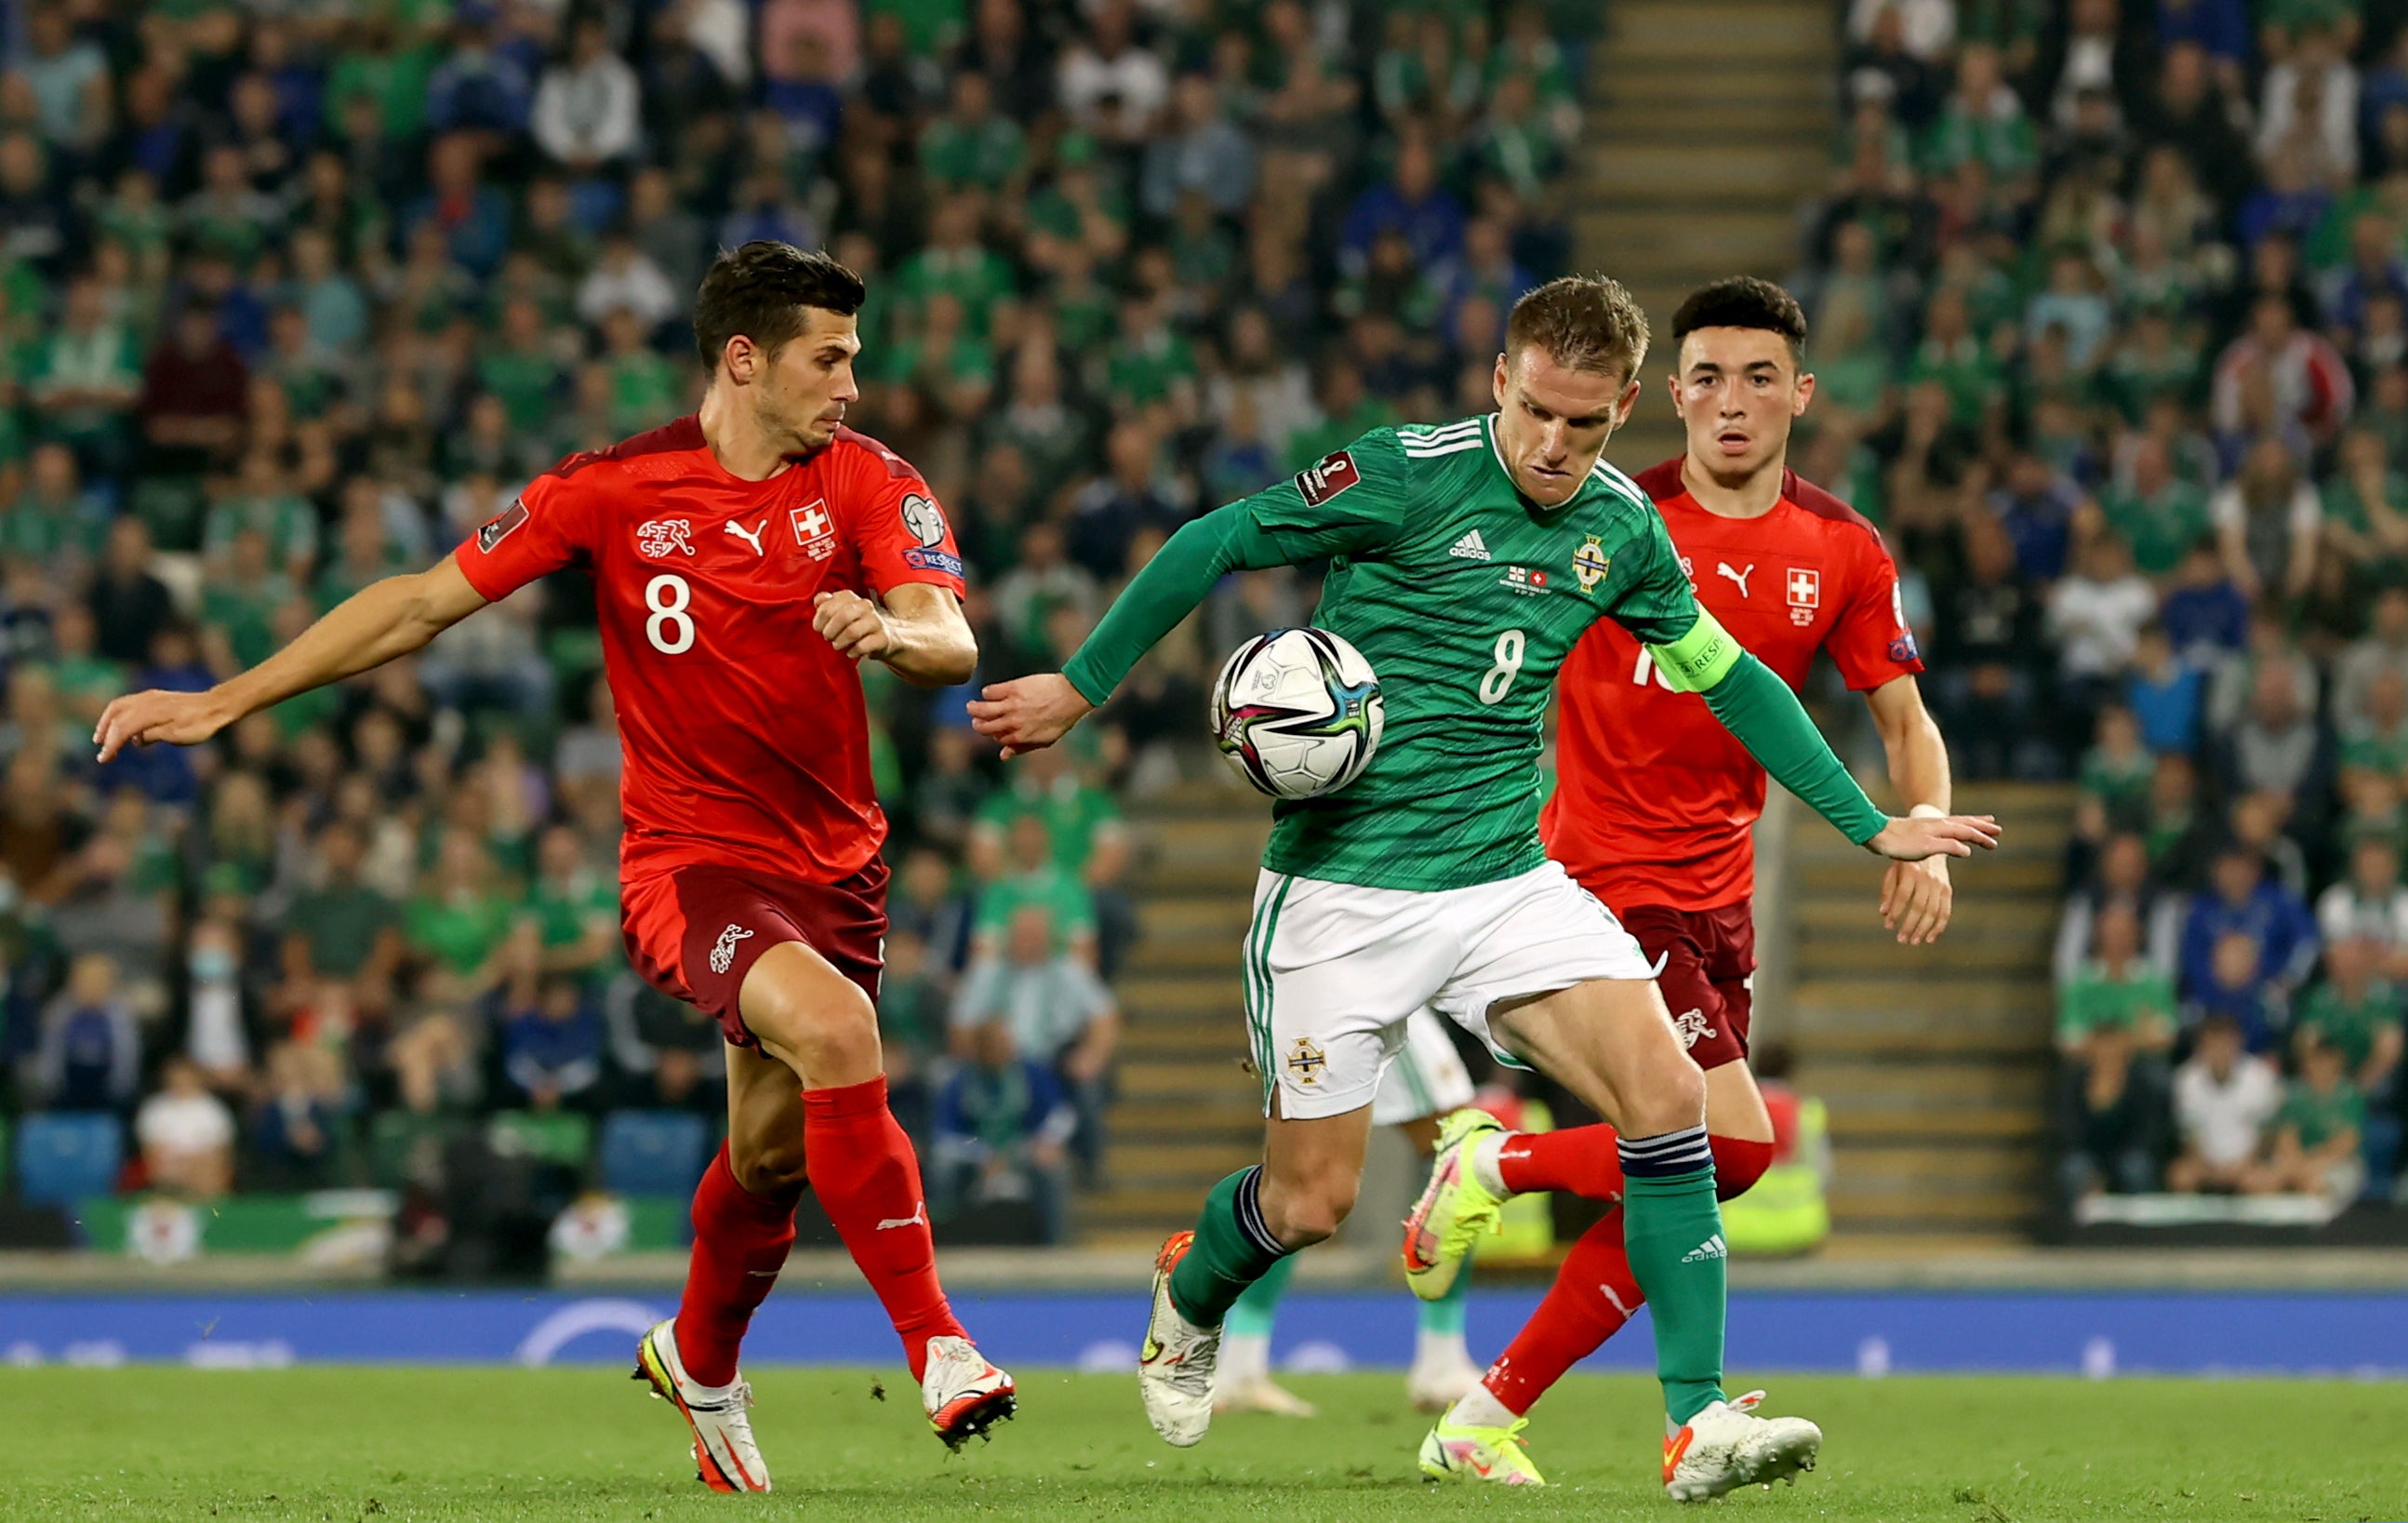 Northern Ireland and Switzerland will resume battle in the race for second place in Group C on Saturday (Liam McBurney/PA)